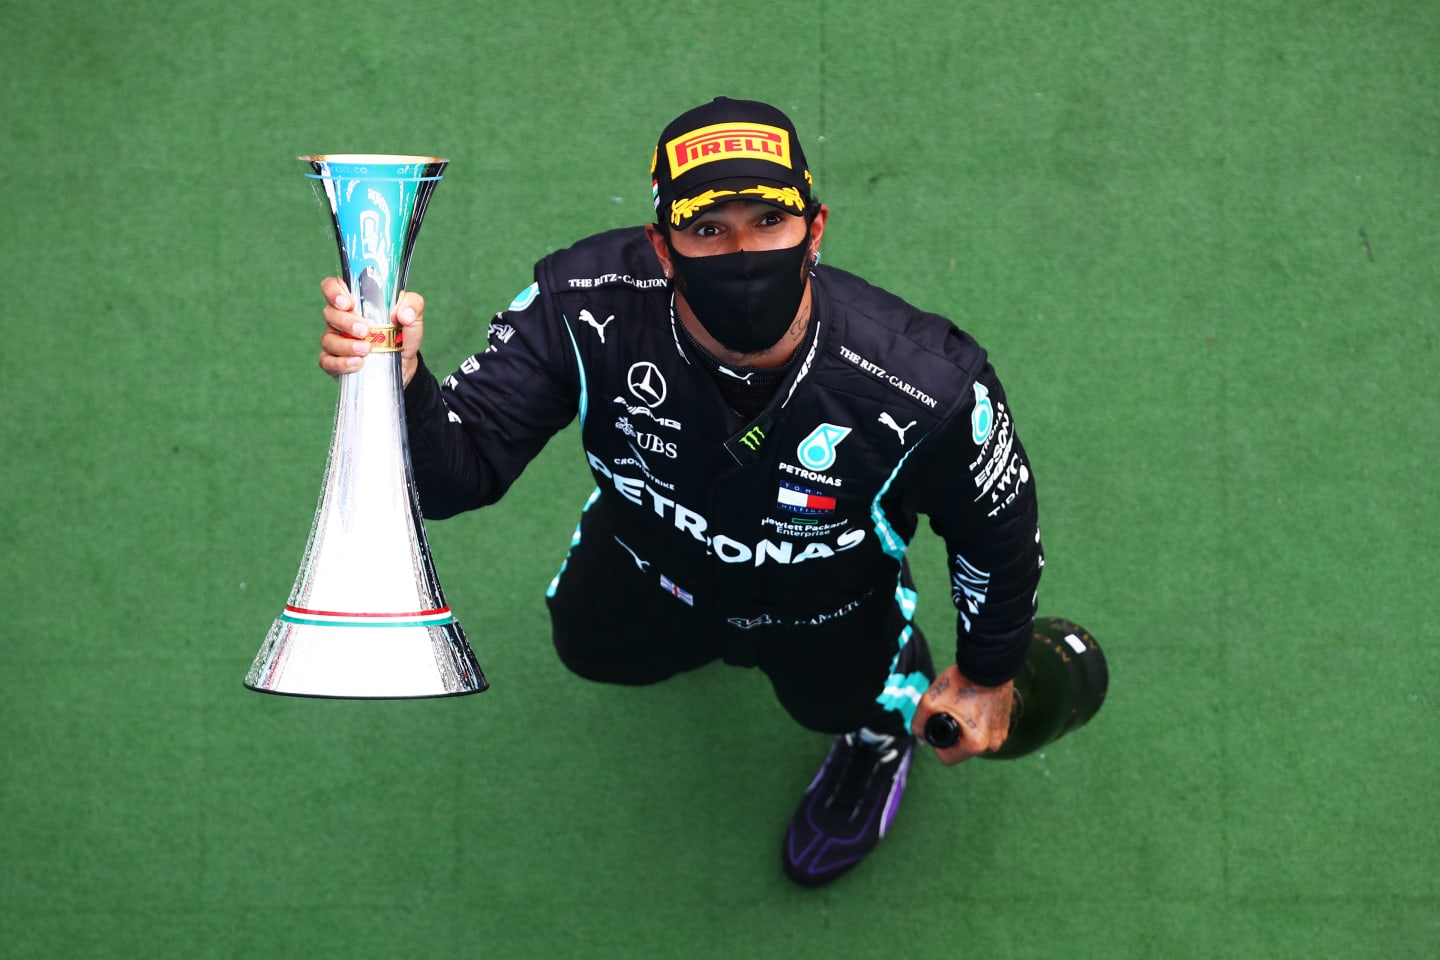 BUDAPEST, HUNGARY - JULY 19: Race winner Lewis Hamilton of Great Britain and Mercedes GP celebrates